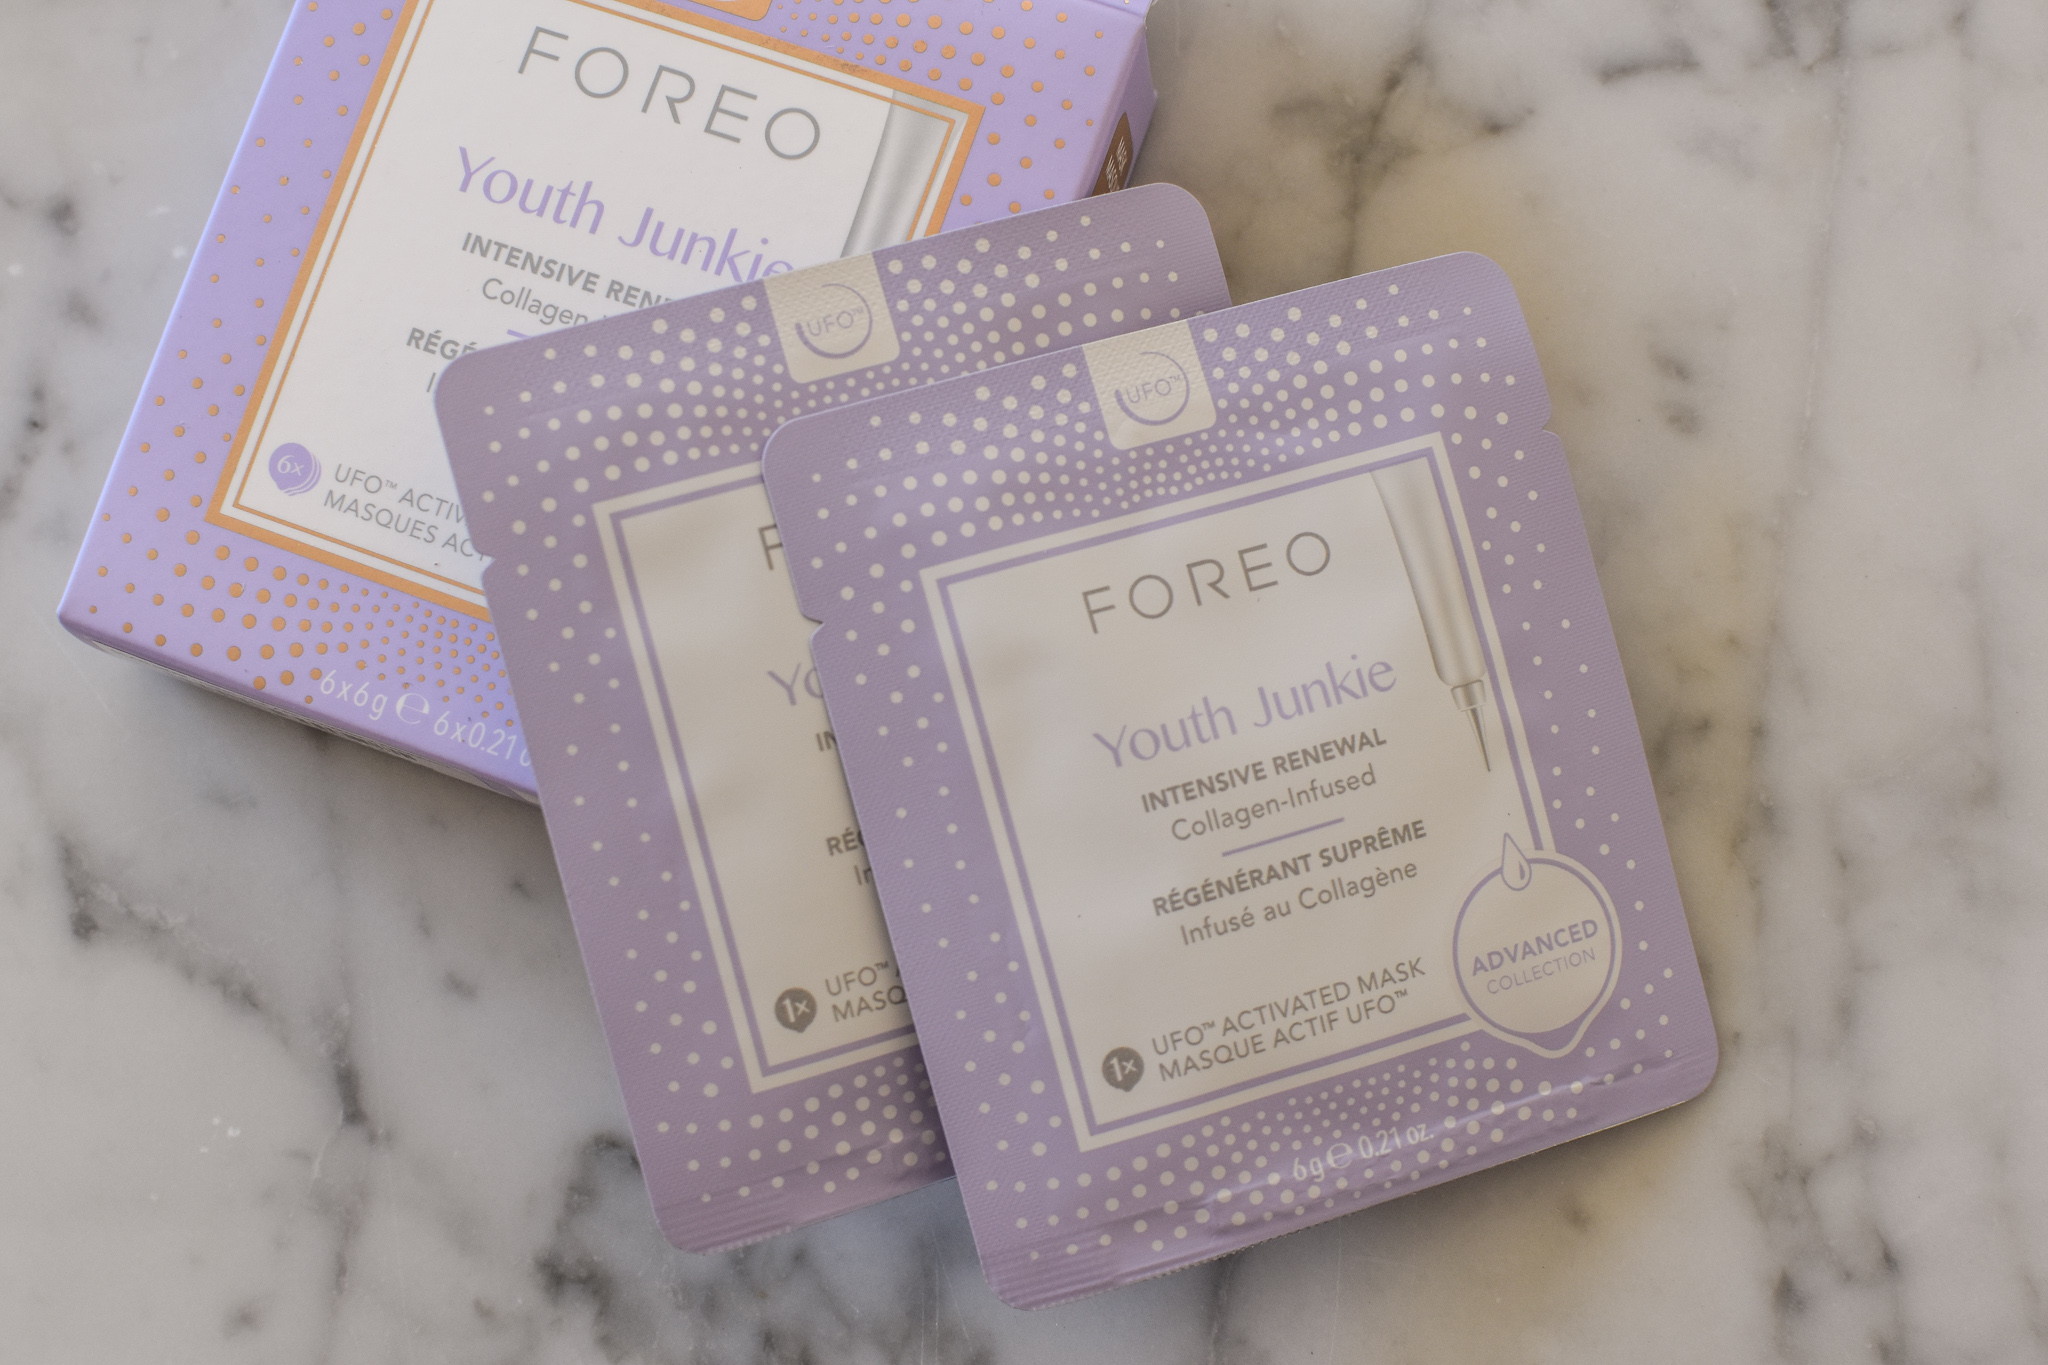 Foreo UFO 2 Review